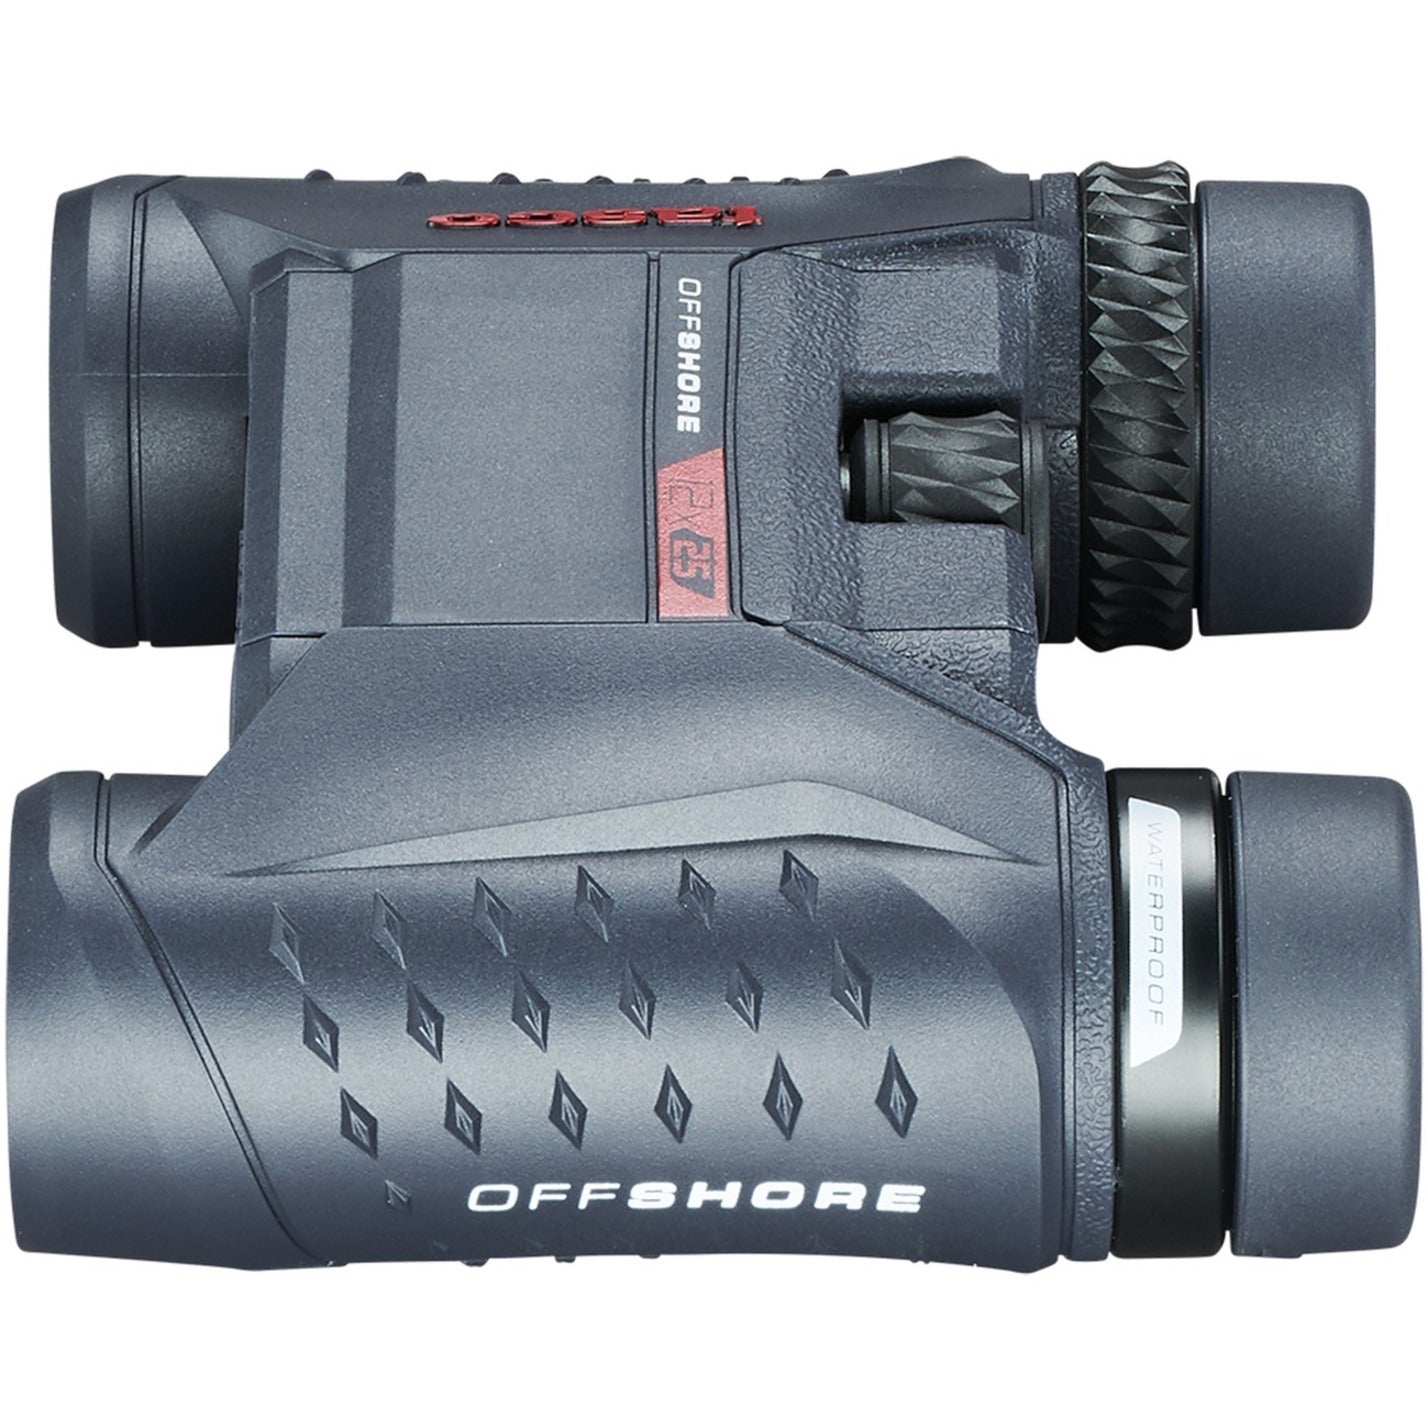 Tasco 12x25 Binocular - Compact and Powerful Optics for Outdoor Adventures [Discontinued]